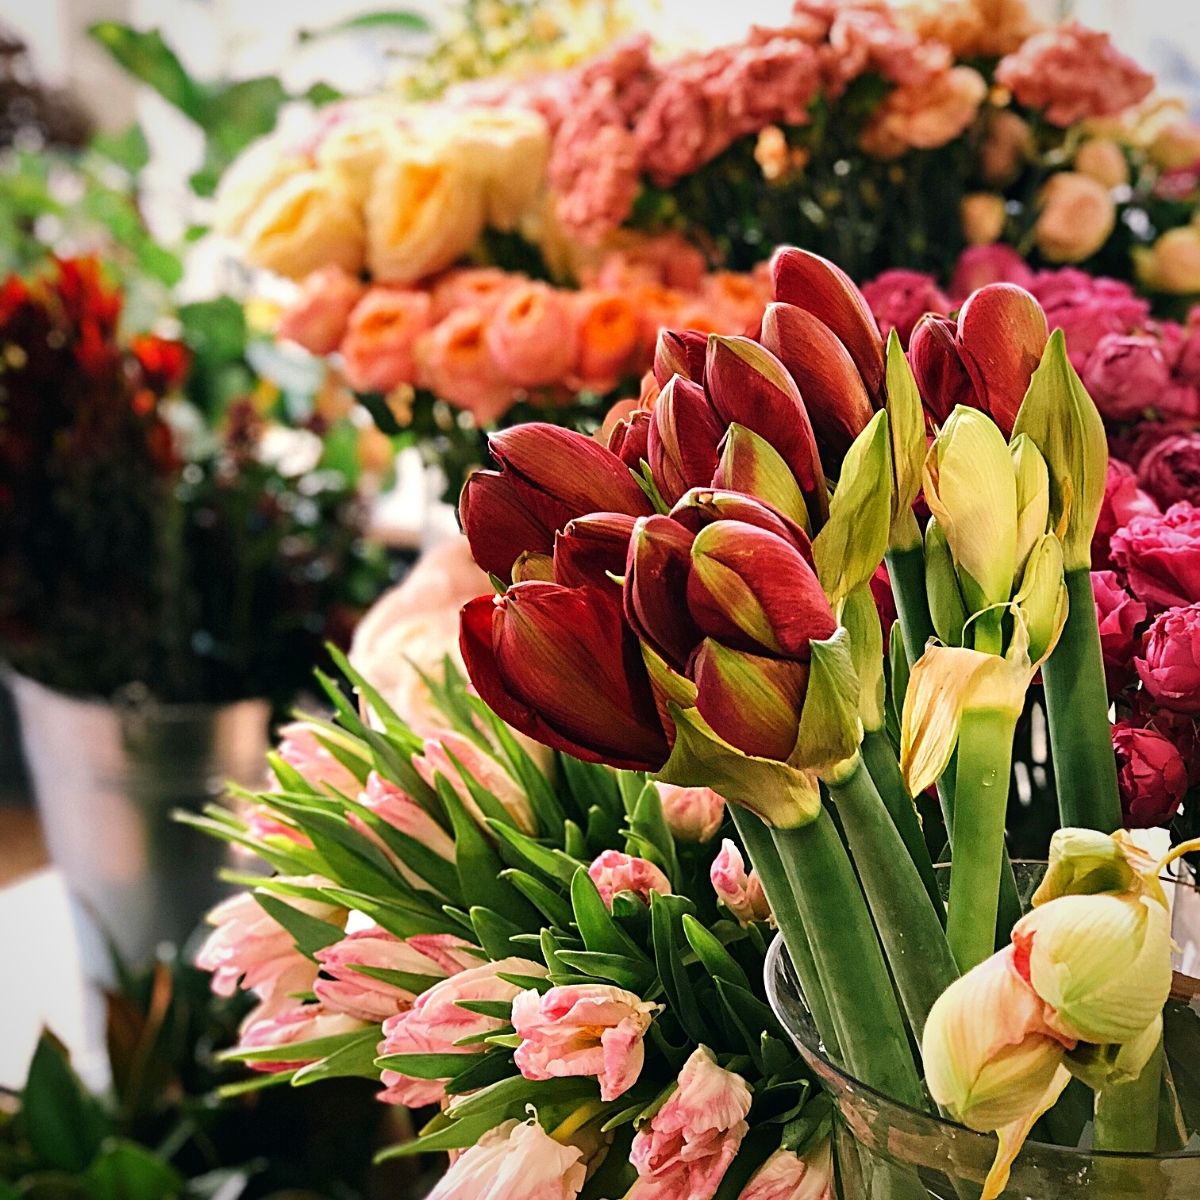 There is a growing demand for sustainable flowers